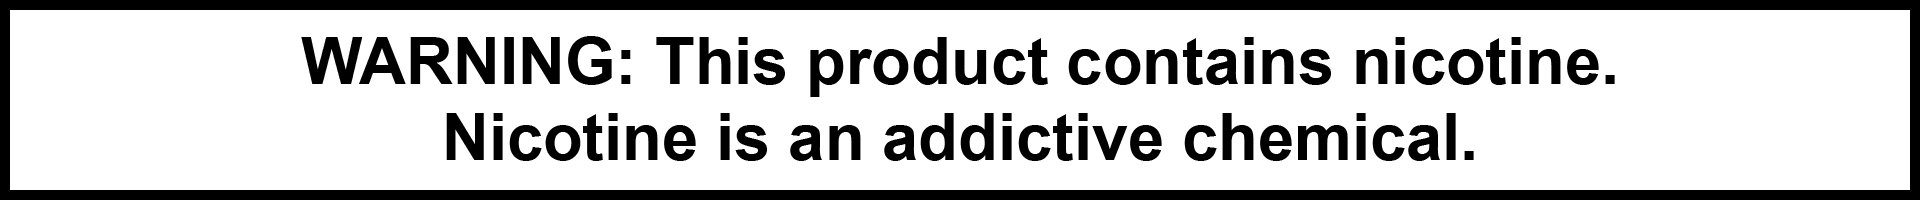 WARNING: This product contains nicotine. Nicotine is an addictive chemical.